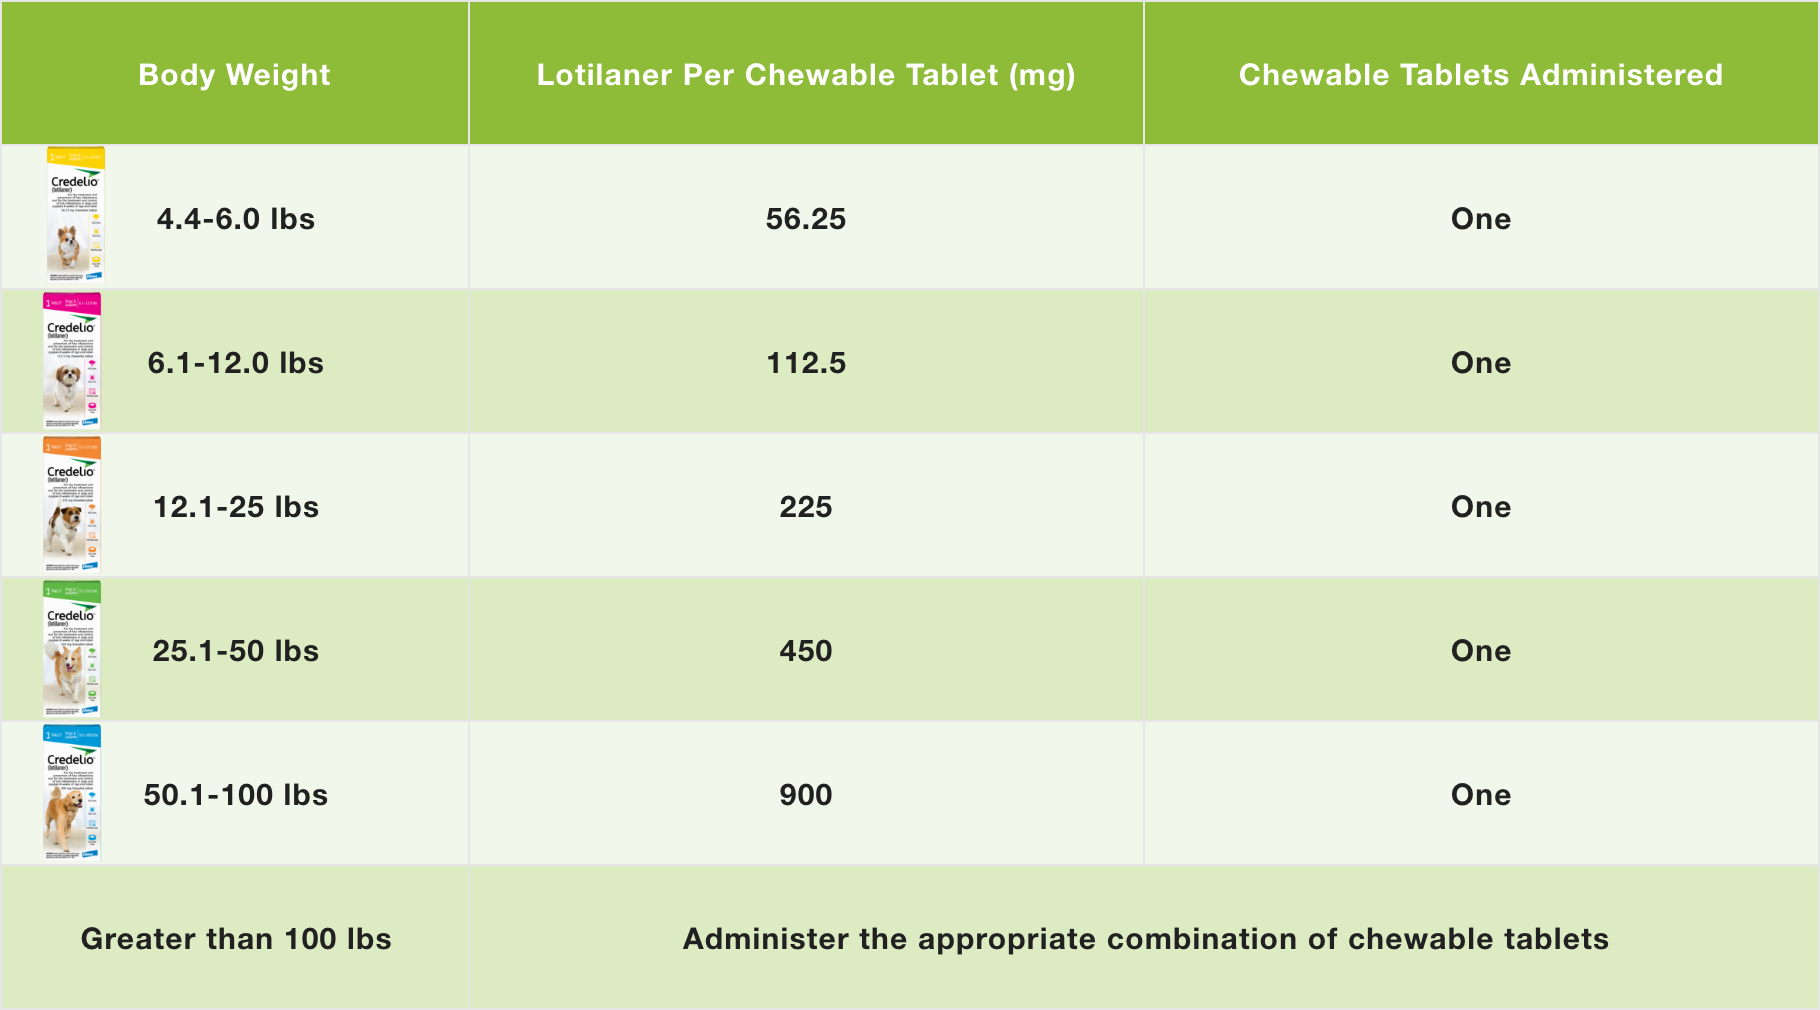 Credelio dosage chart by dog weight 